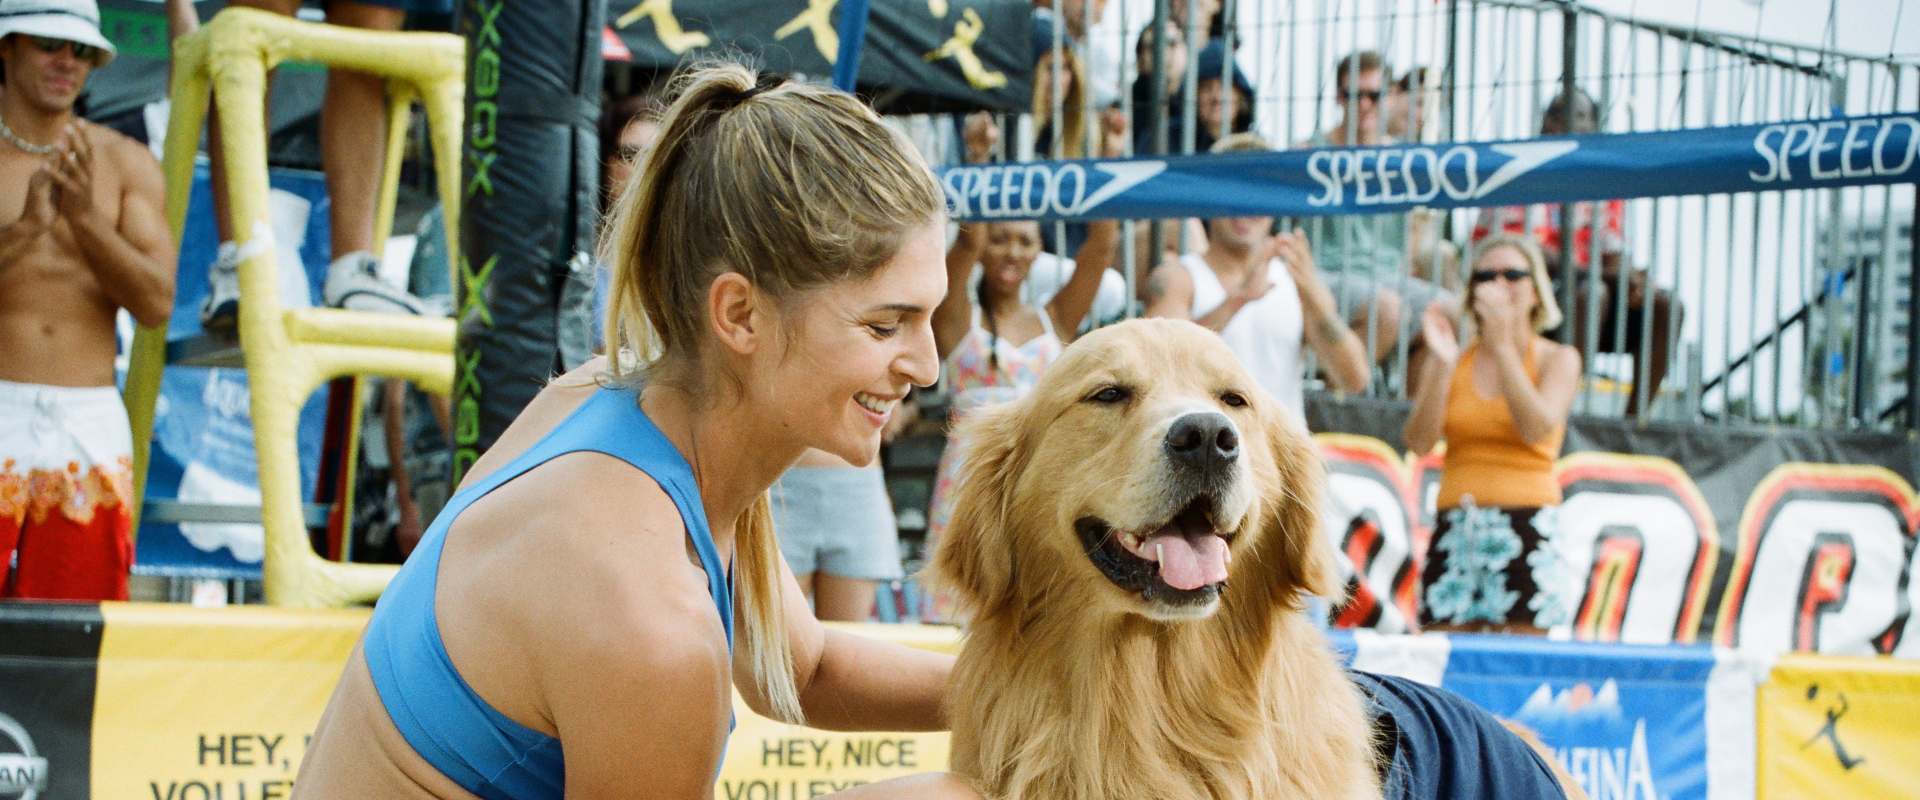 Air Bud: Spikes Back background 1